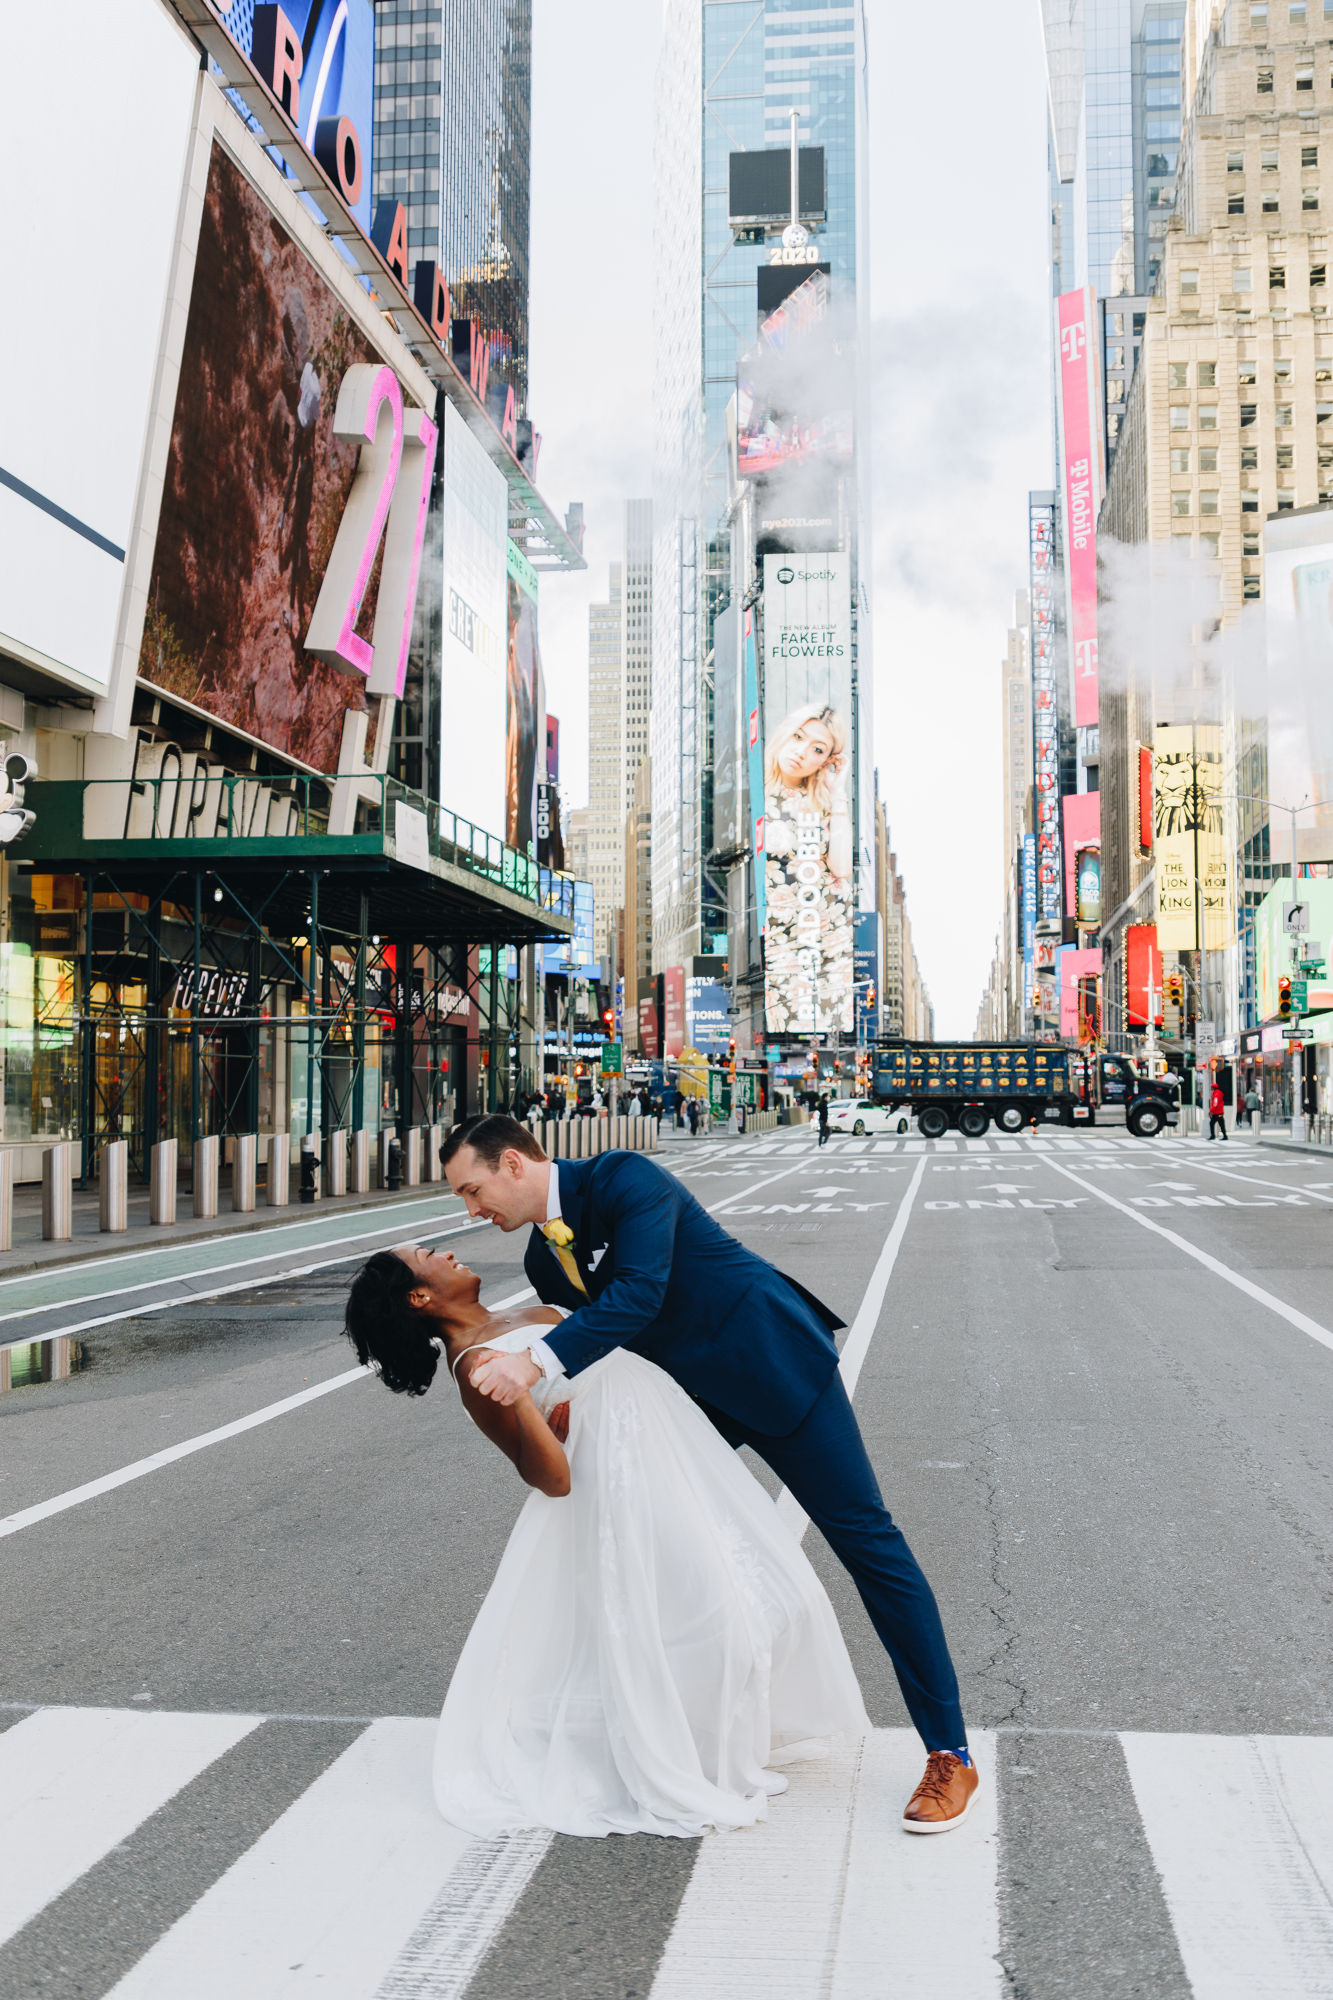 Stunning Times Square Wedding Photos in New York